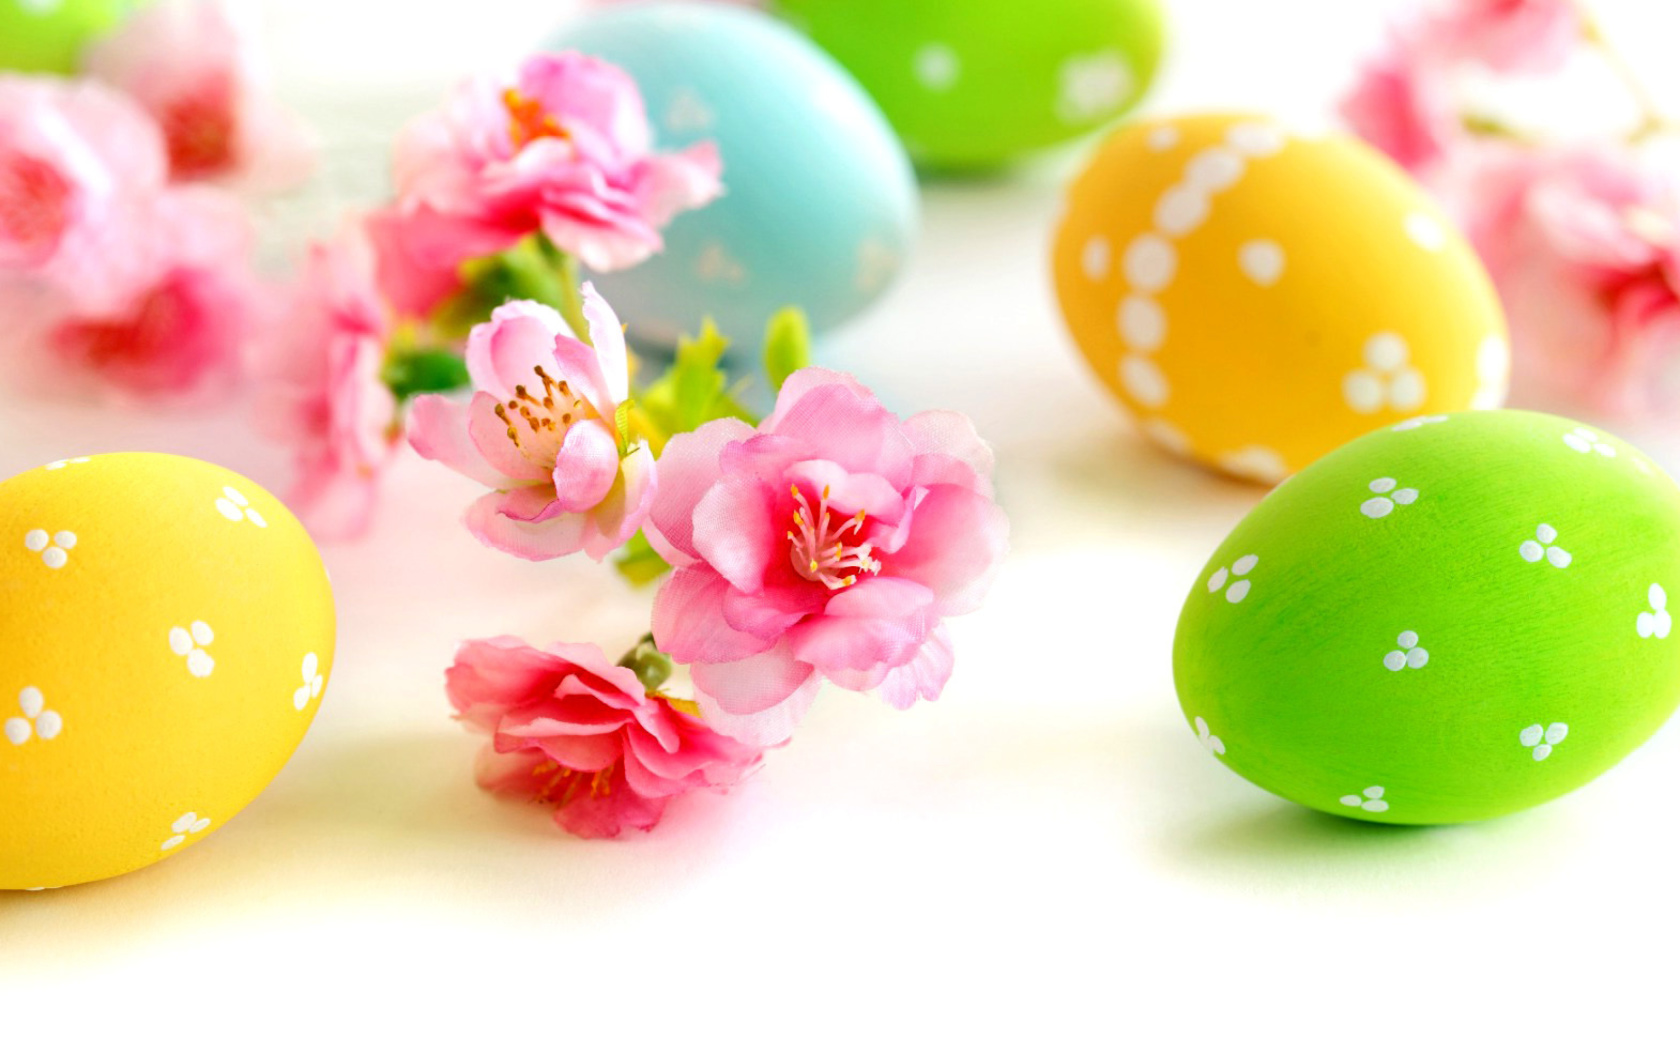 Easter Eggs and Spring Flowers wallpaper 1680x1050